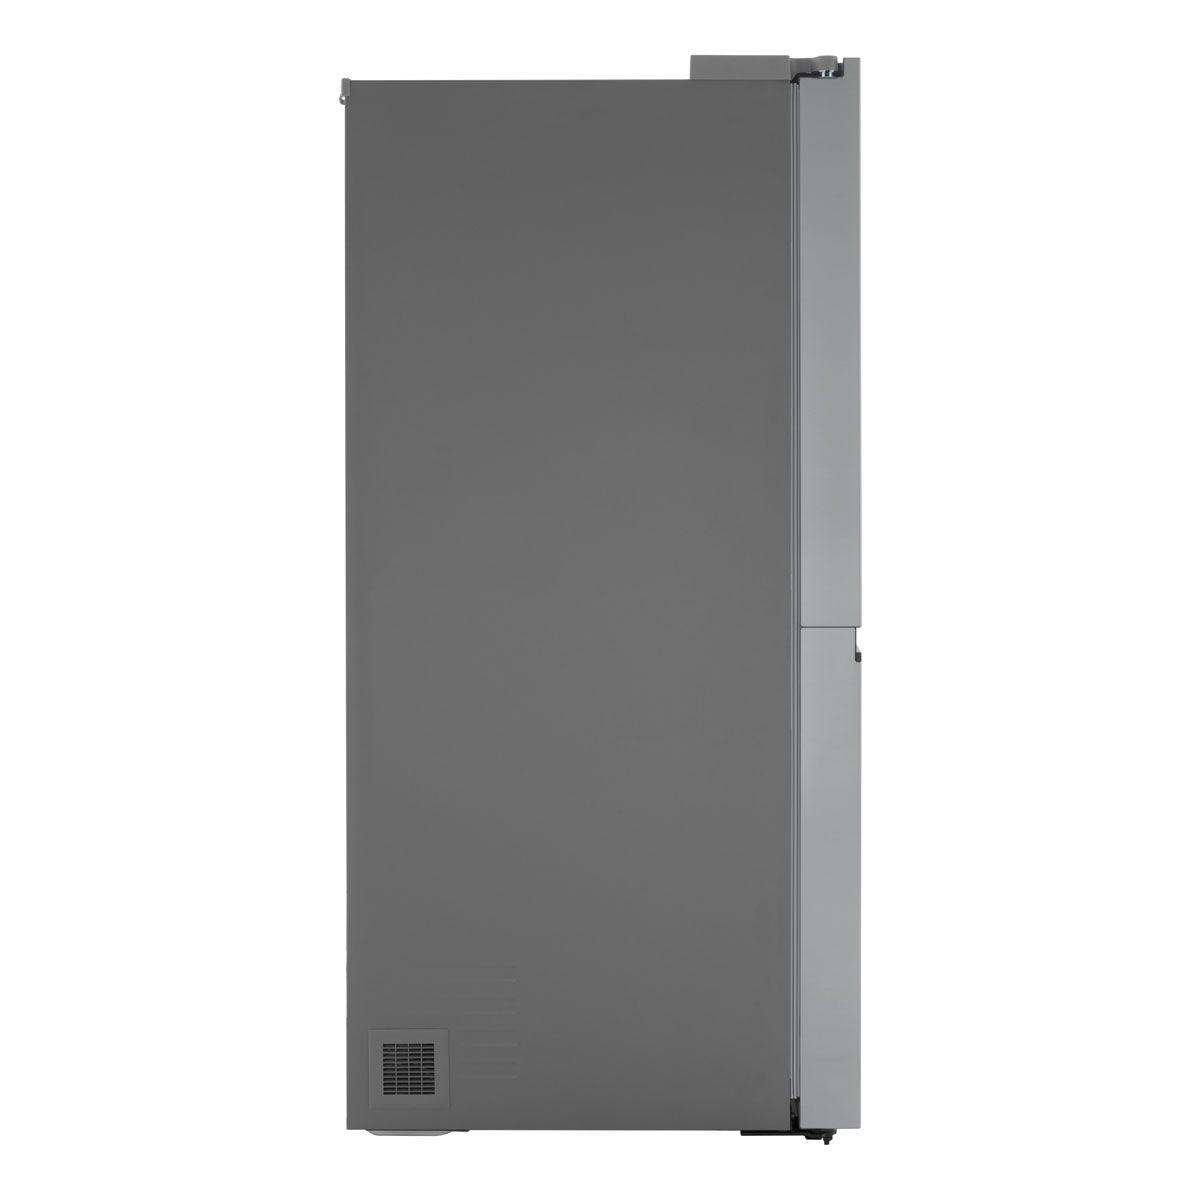 LG SIDE-BY-SIDE REFRIGERATOR | Badcock Home Furniture &more